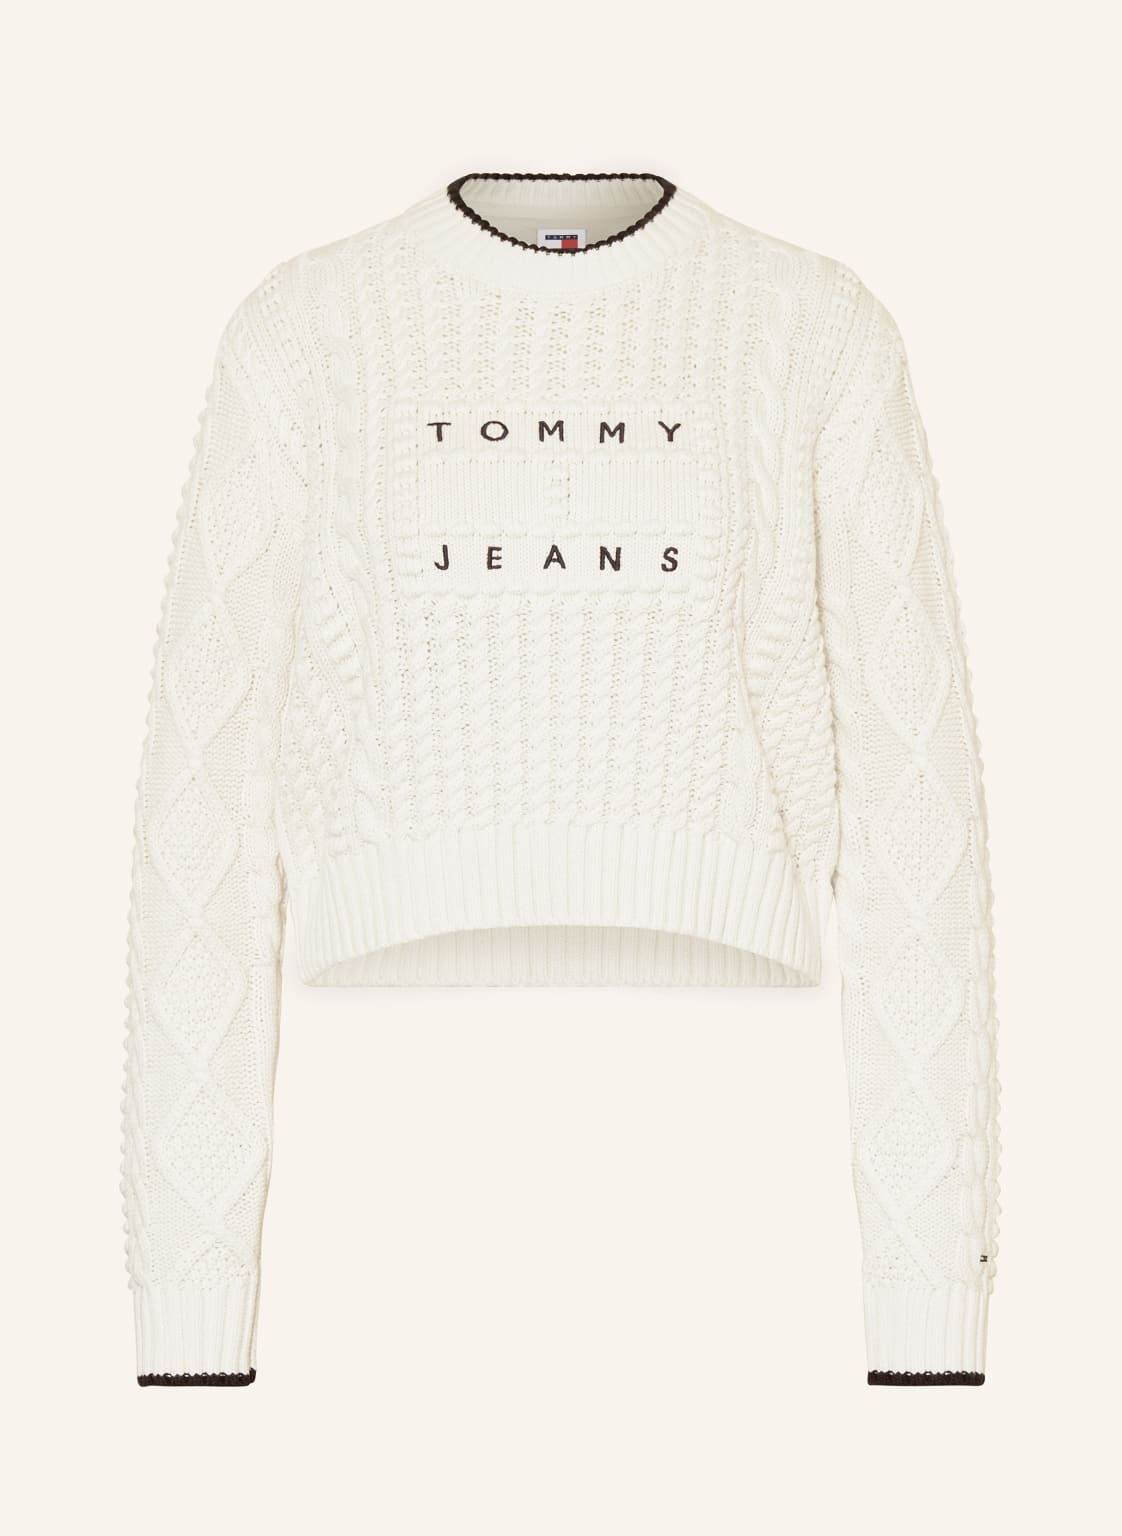 Tommy Jeans Pullover weiss von Tommy Jeans